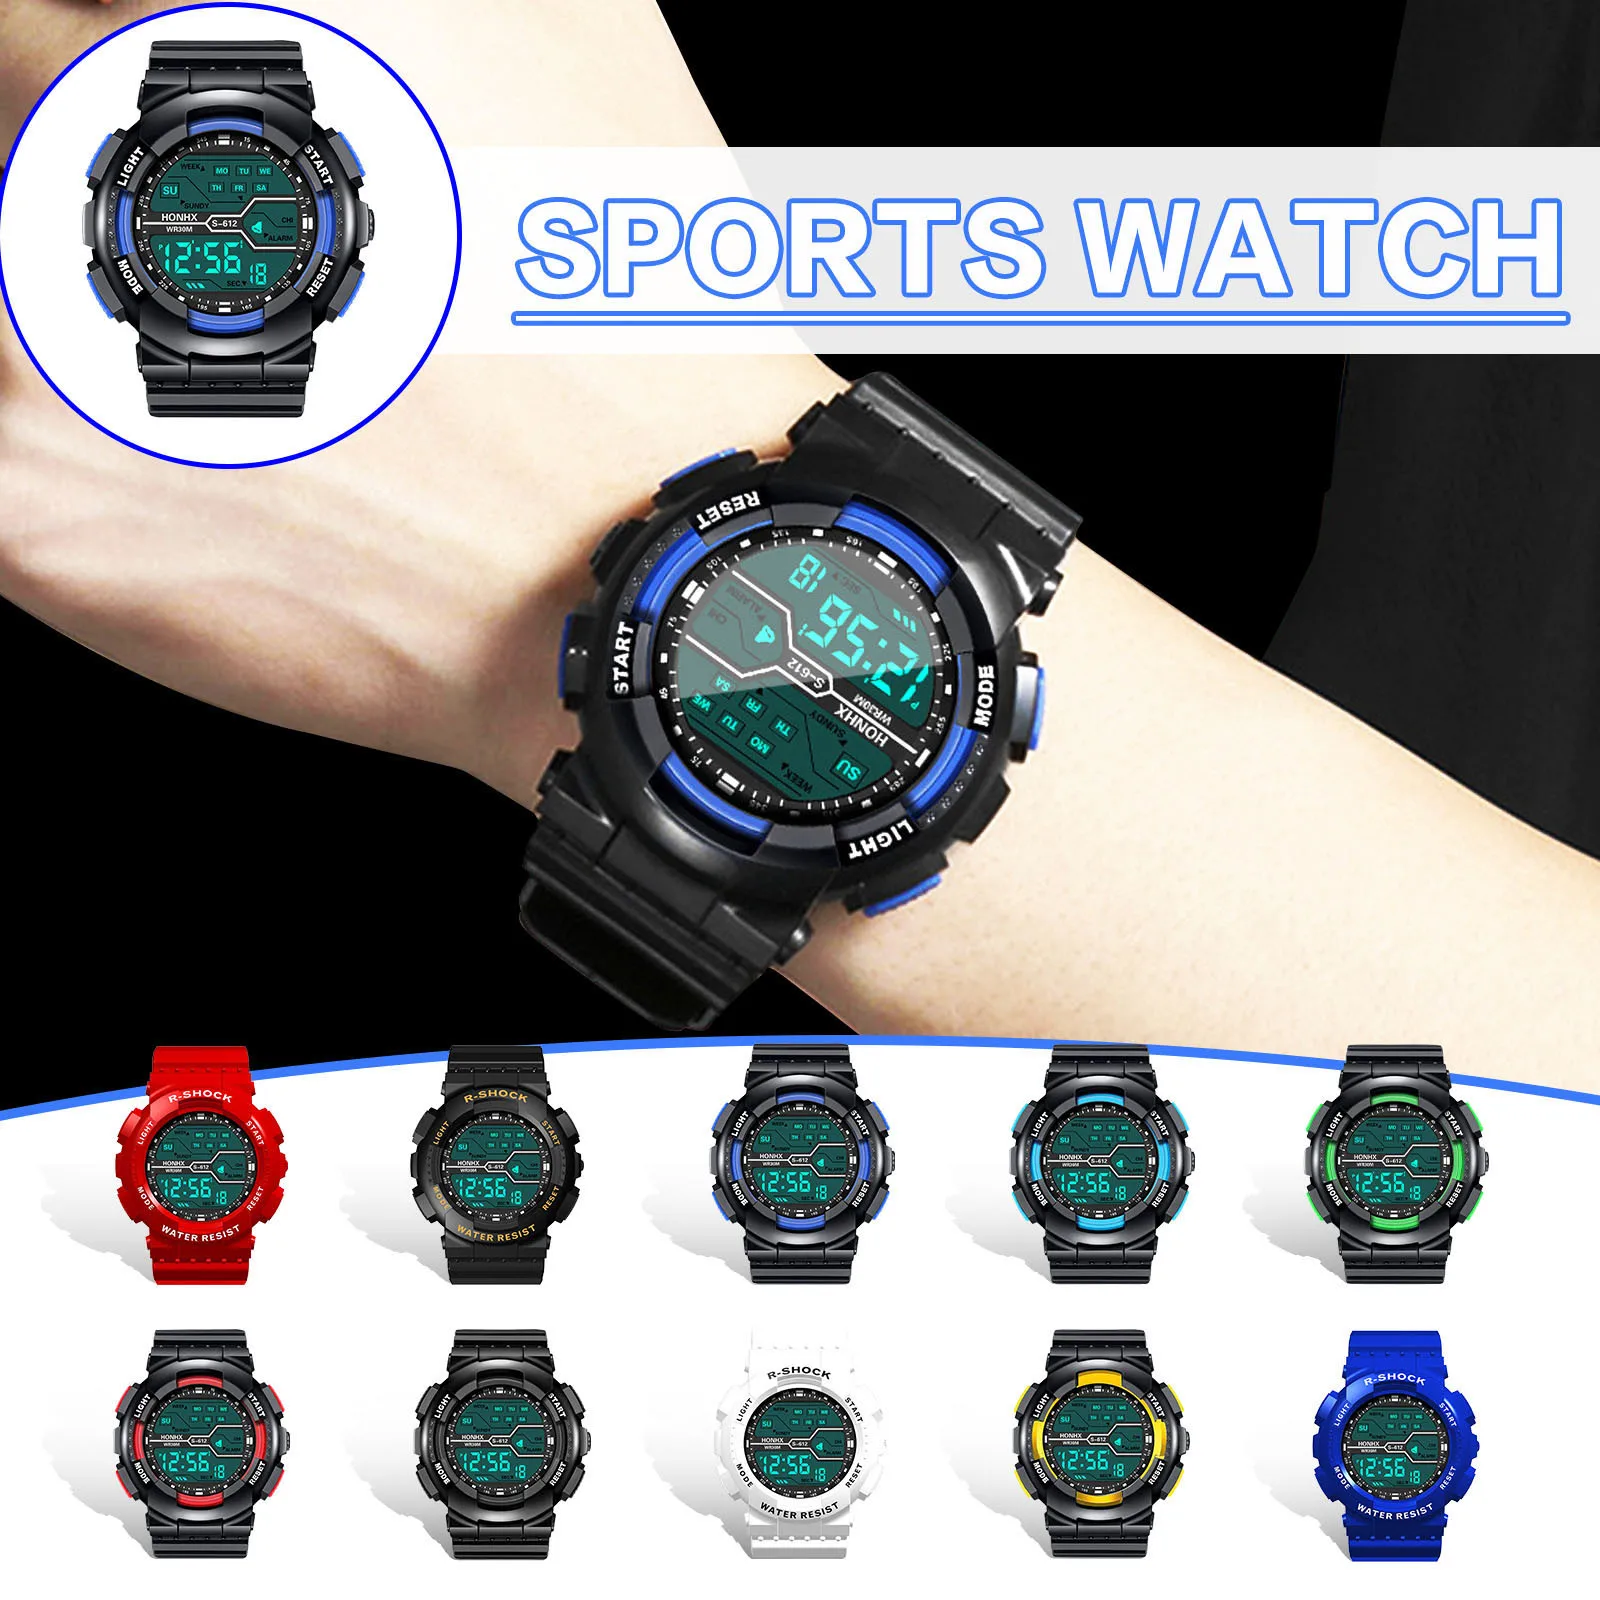 

HONHX A Variety Of Styles Of Cool Sports Electronic Watches With Four Buttons Relogio Masculino Watch часы мужские наручные